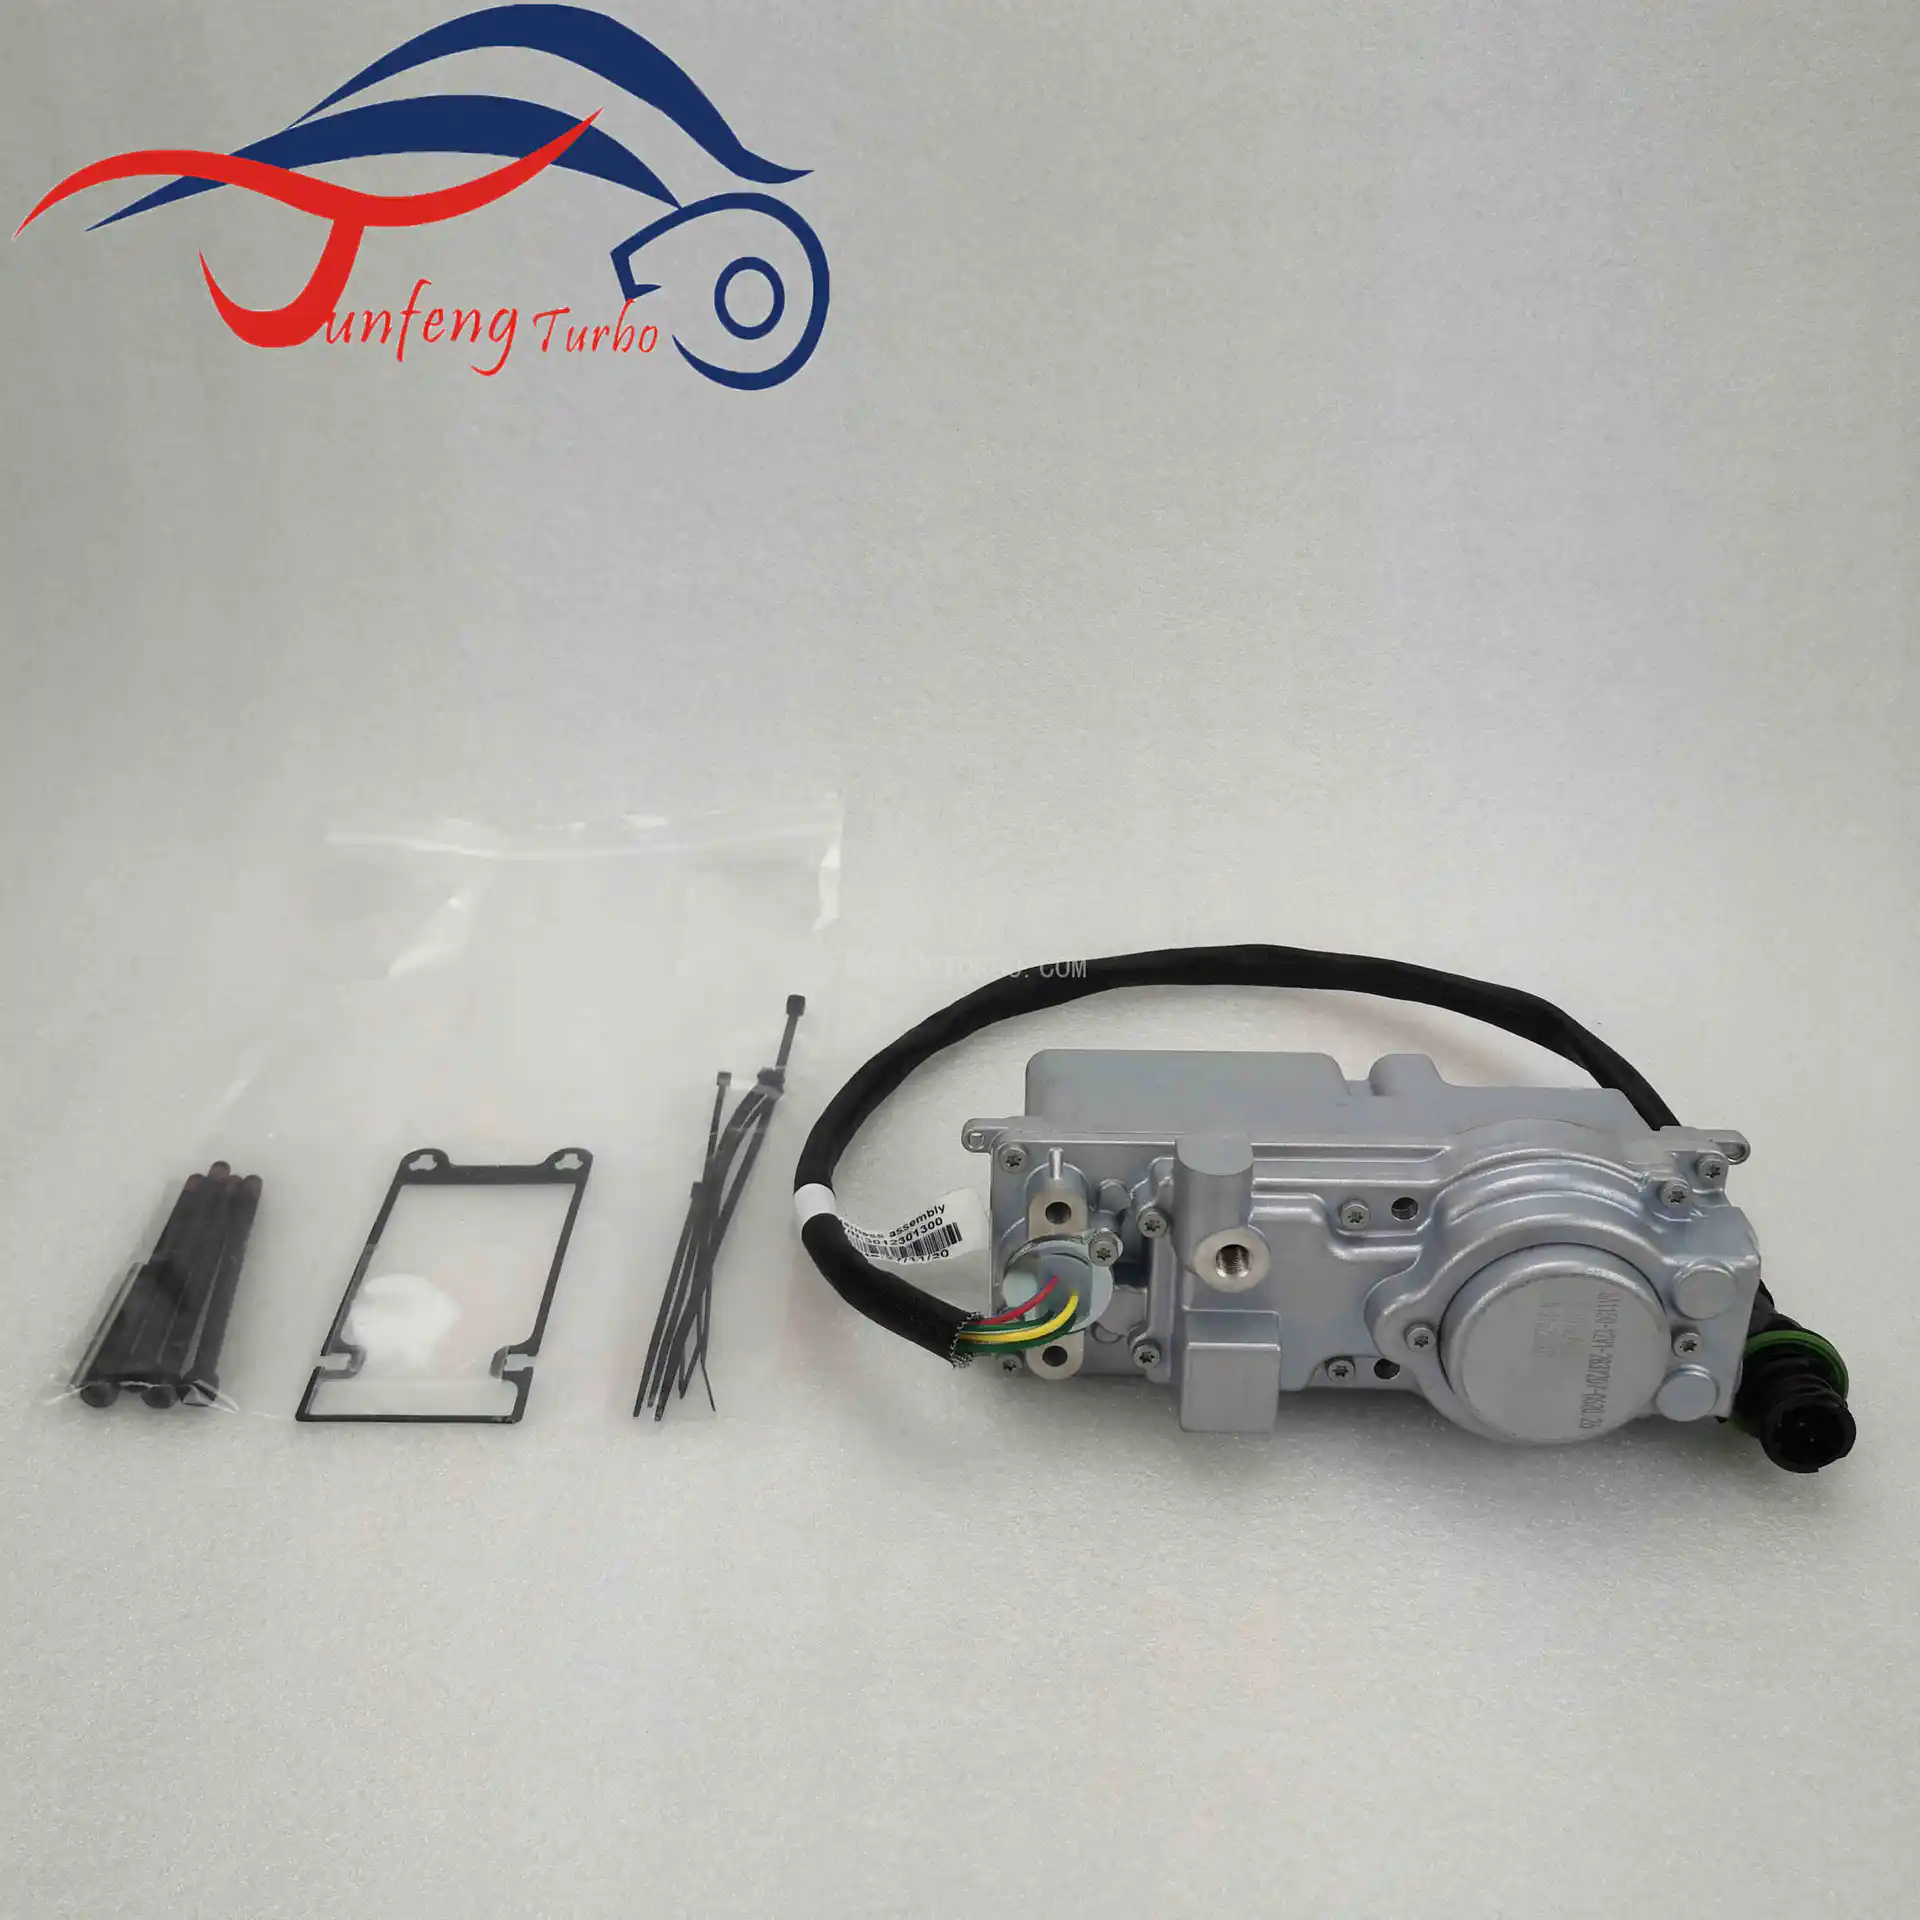 HE431VE 3776805 2837207 12V turbocharger eletronic actuator for Volvo D13 MP8 Mack Truck  MD11 US07 Engine